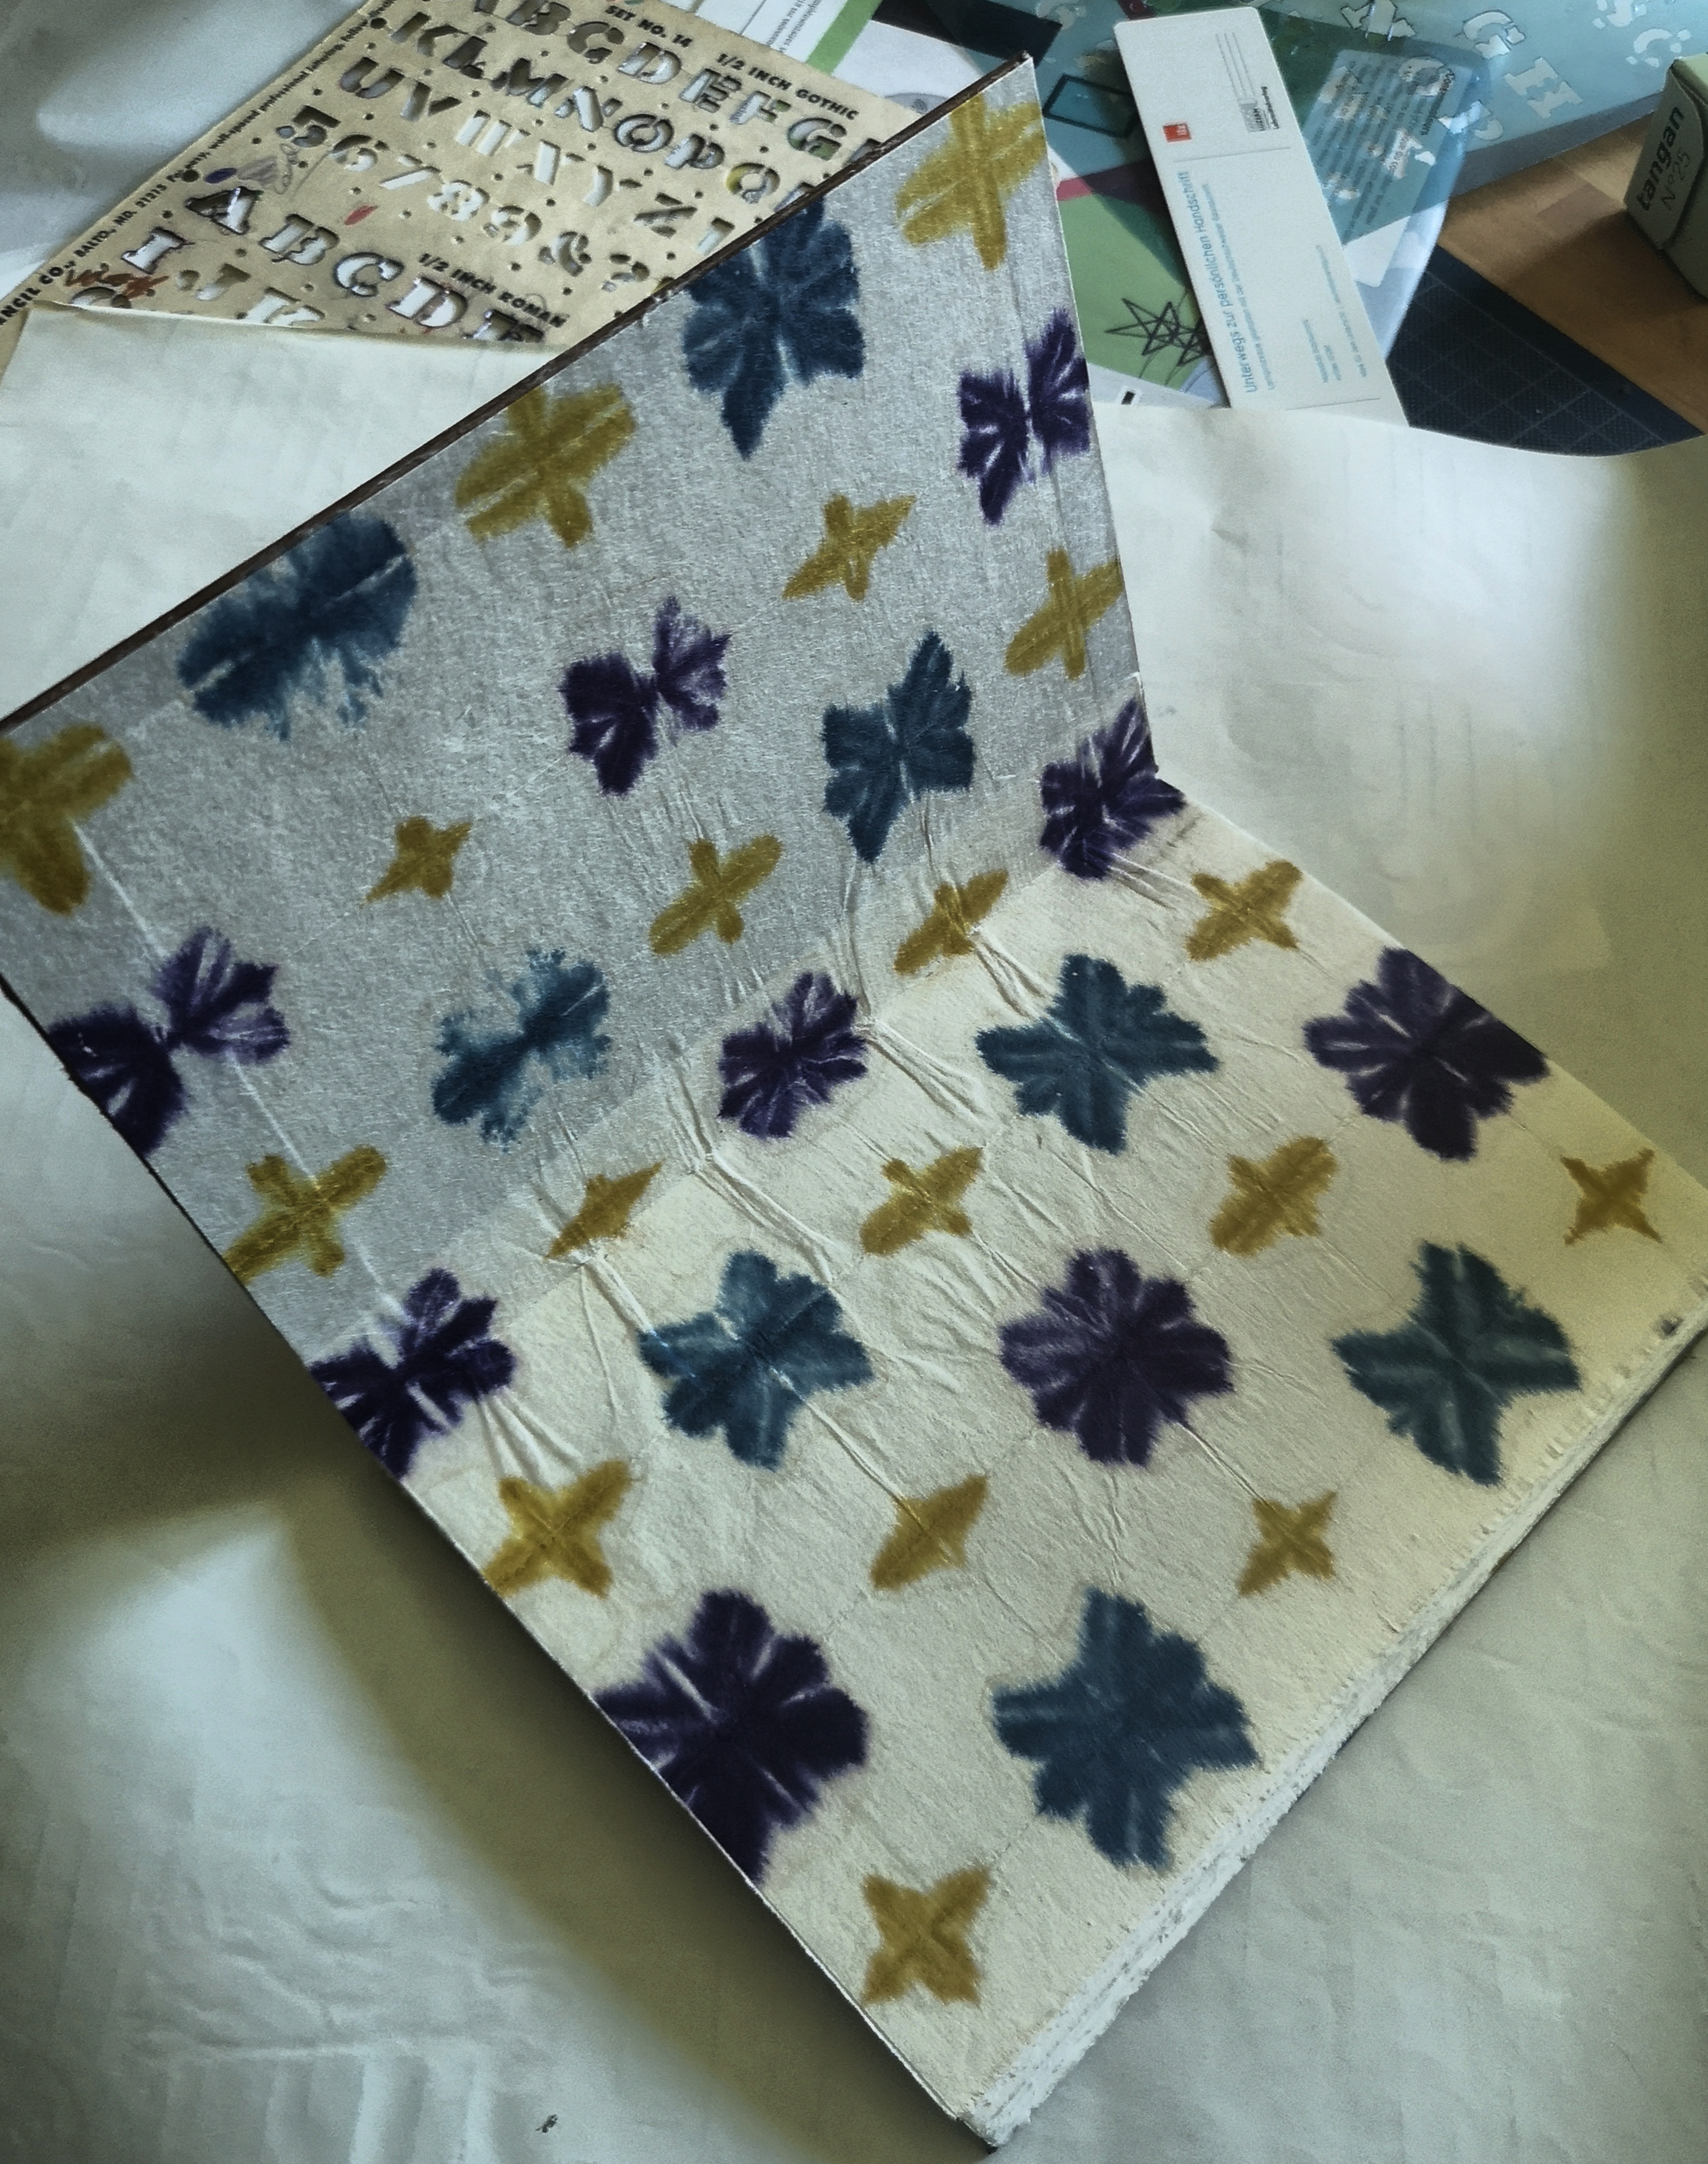 I prepared the cover with bookboard and a handmade decorative paper separately (not shown) and glued the inset pages. For these I used a handmade paper I picked up un Tokyo a few years back